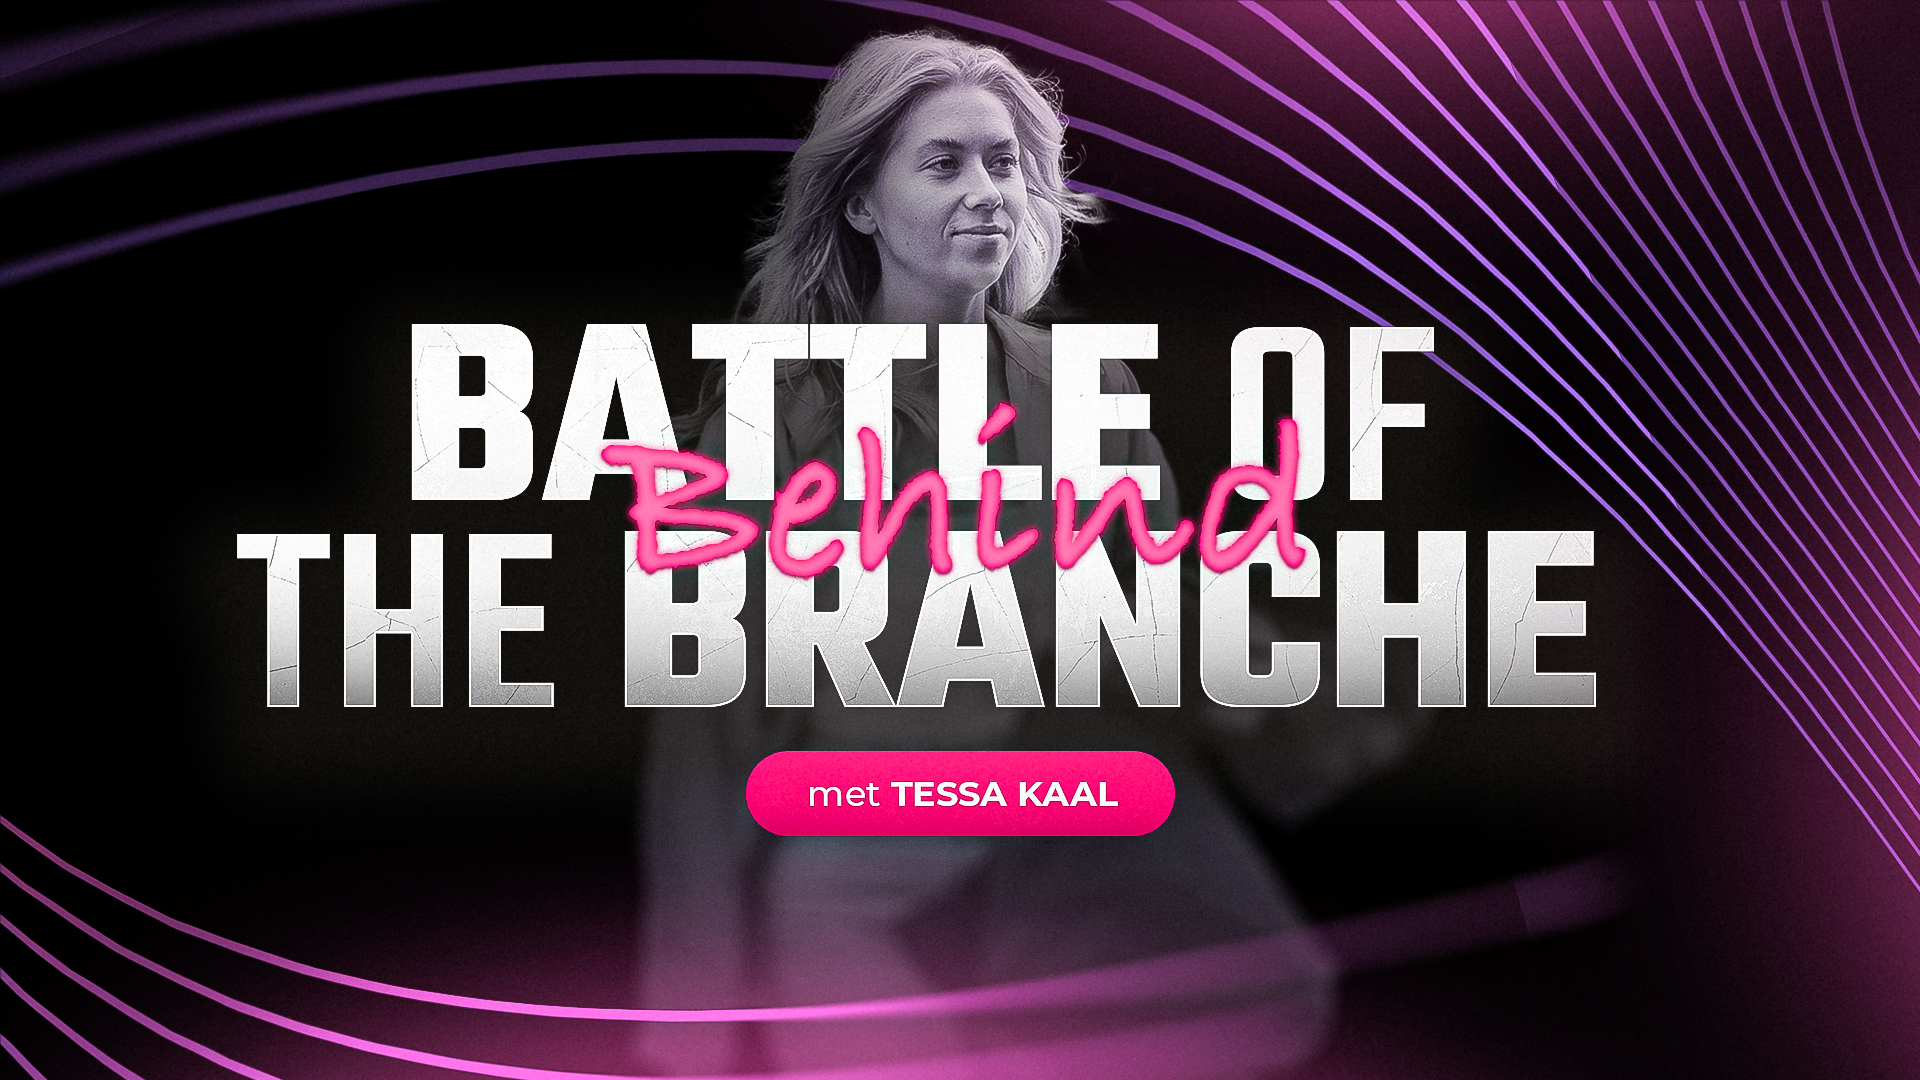 Behind Battle of the Branche - Tessa Kaal